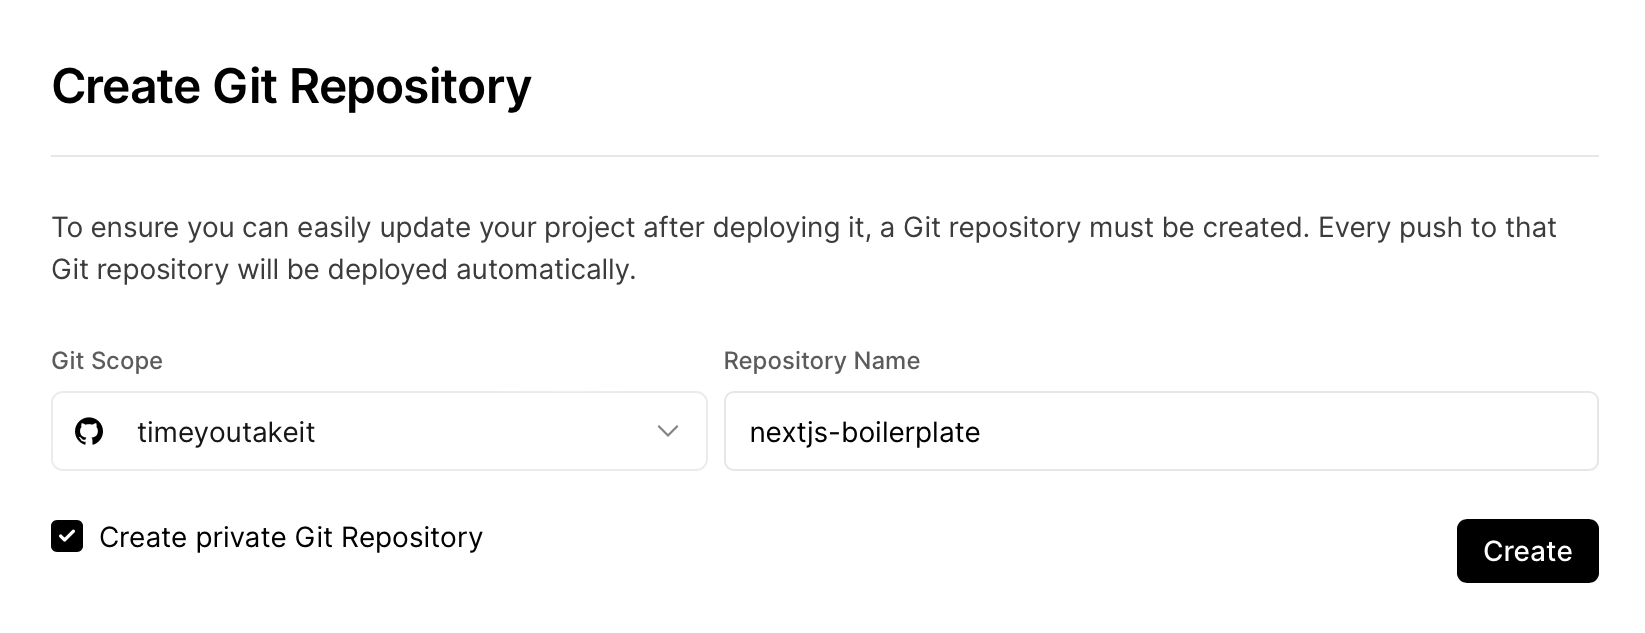 Connecting your Git provider and creating a new repository